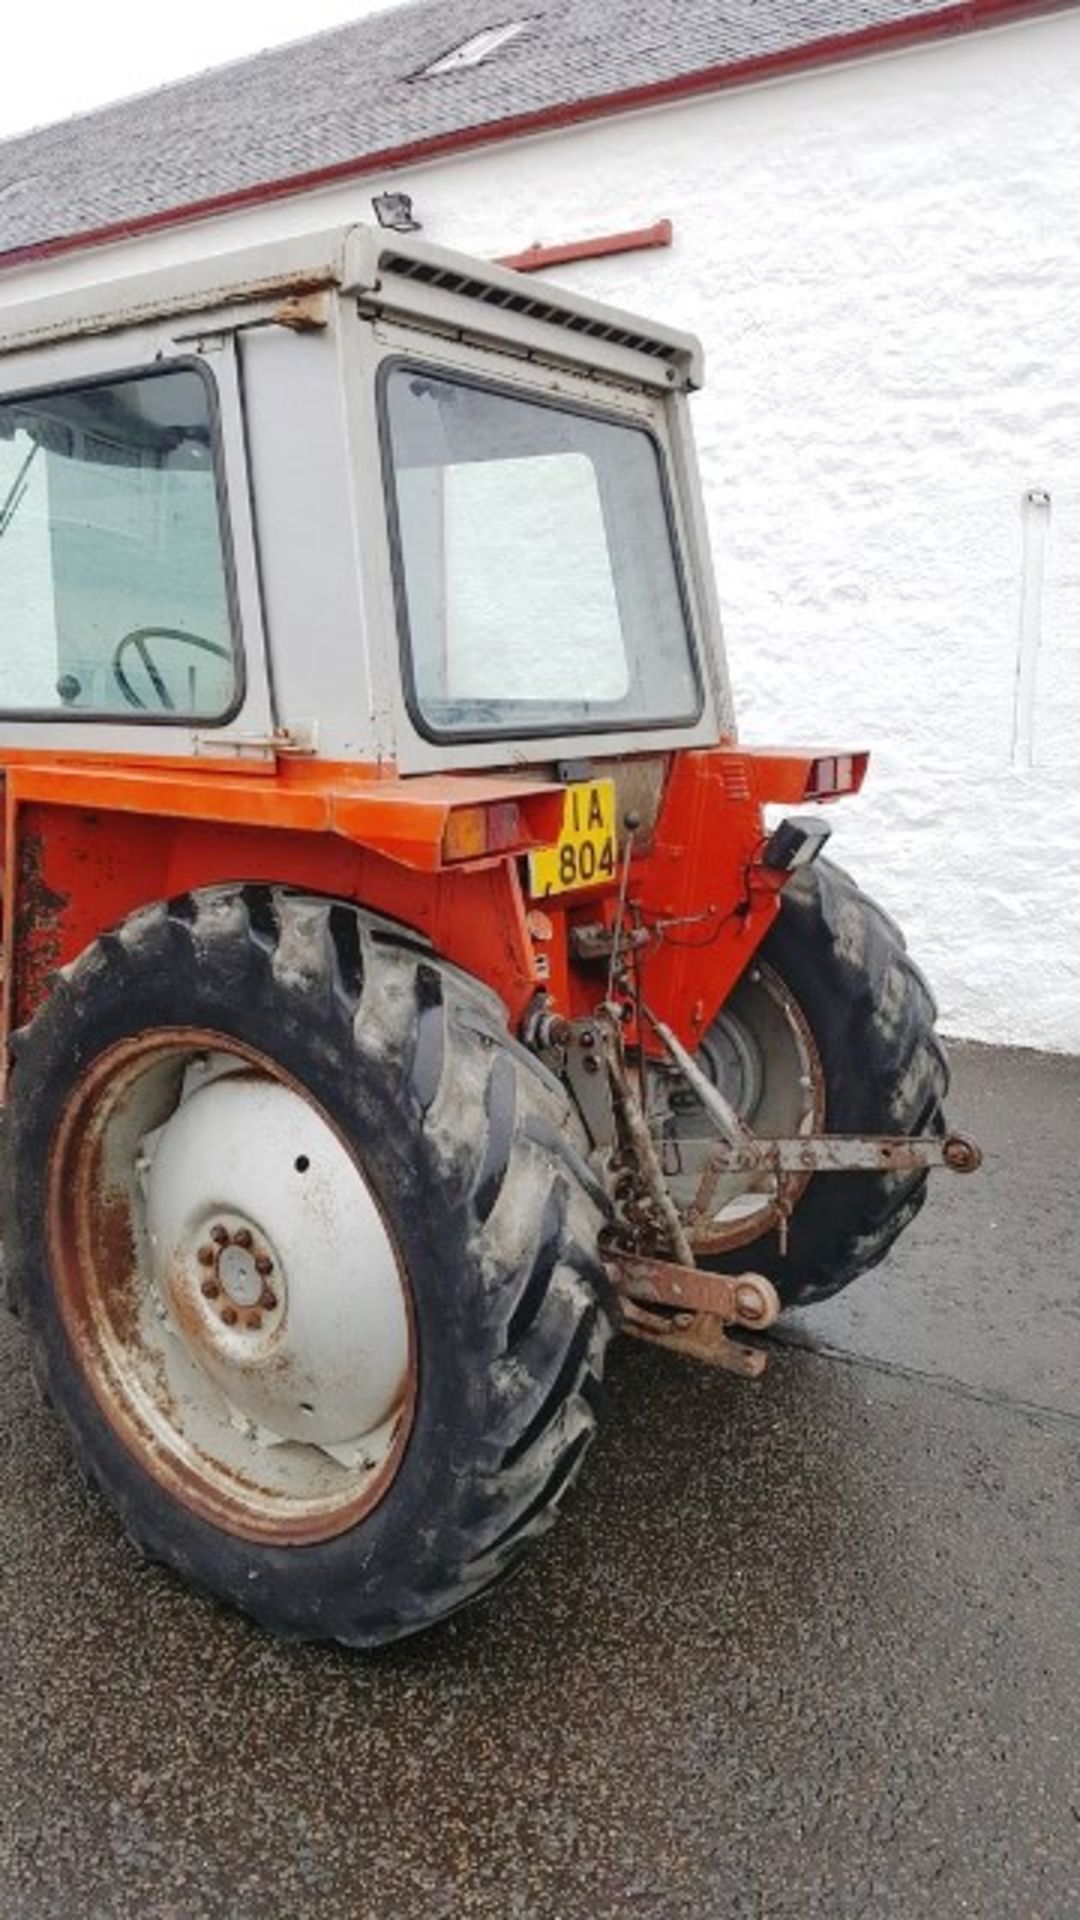 1979 MASSEY FERSUSON 550 tractor s/n 619197. Reg No OIA 804. 863hrs (not verifed) - Image 6 of 7